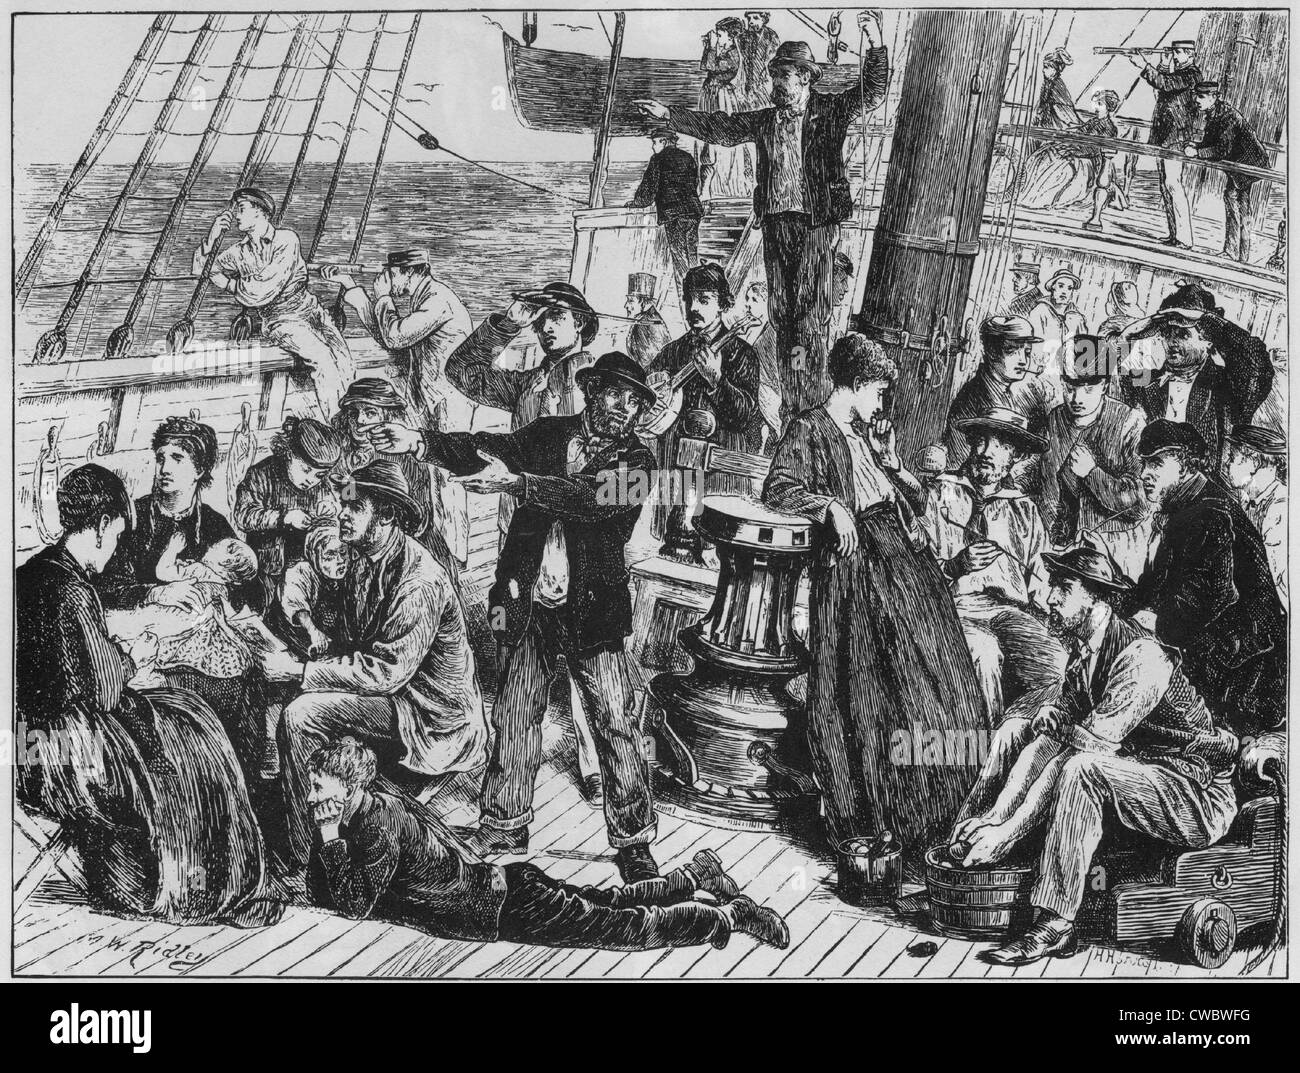 Emigrants on the open deck of an immigrant steamship to Canada, site land after at least two weeks at sea. The ship, GANGES, Stock Photo